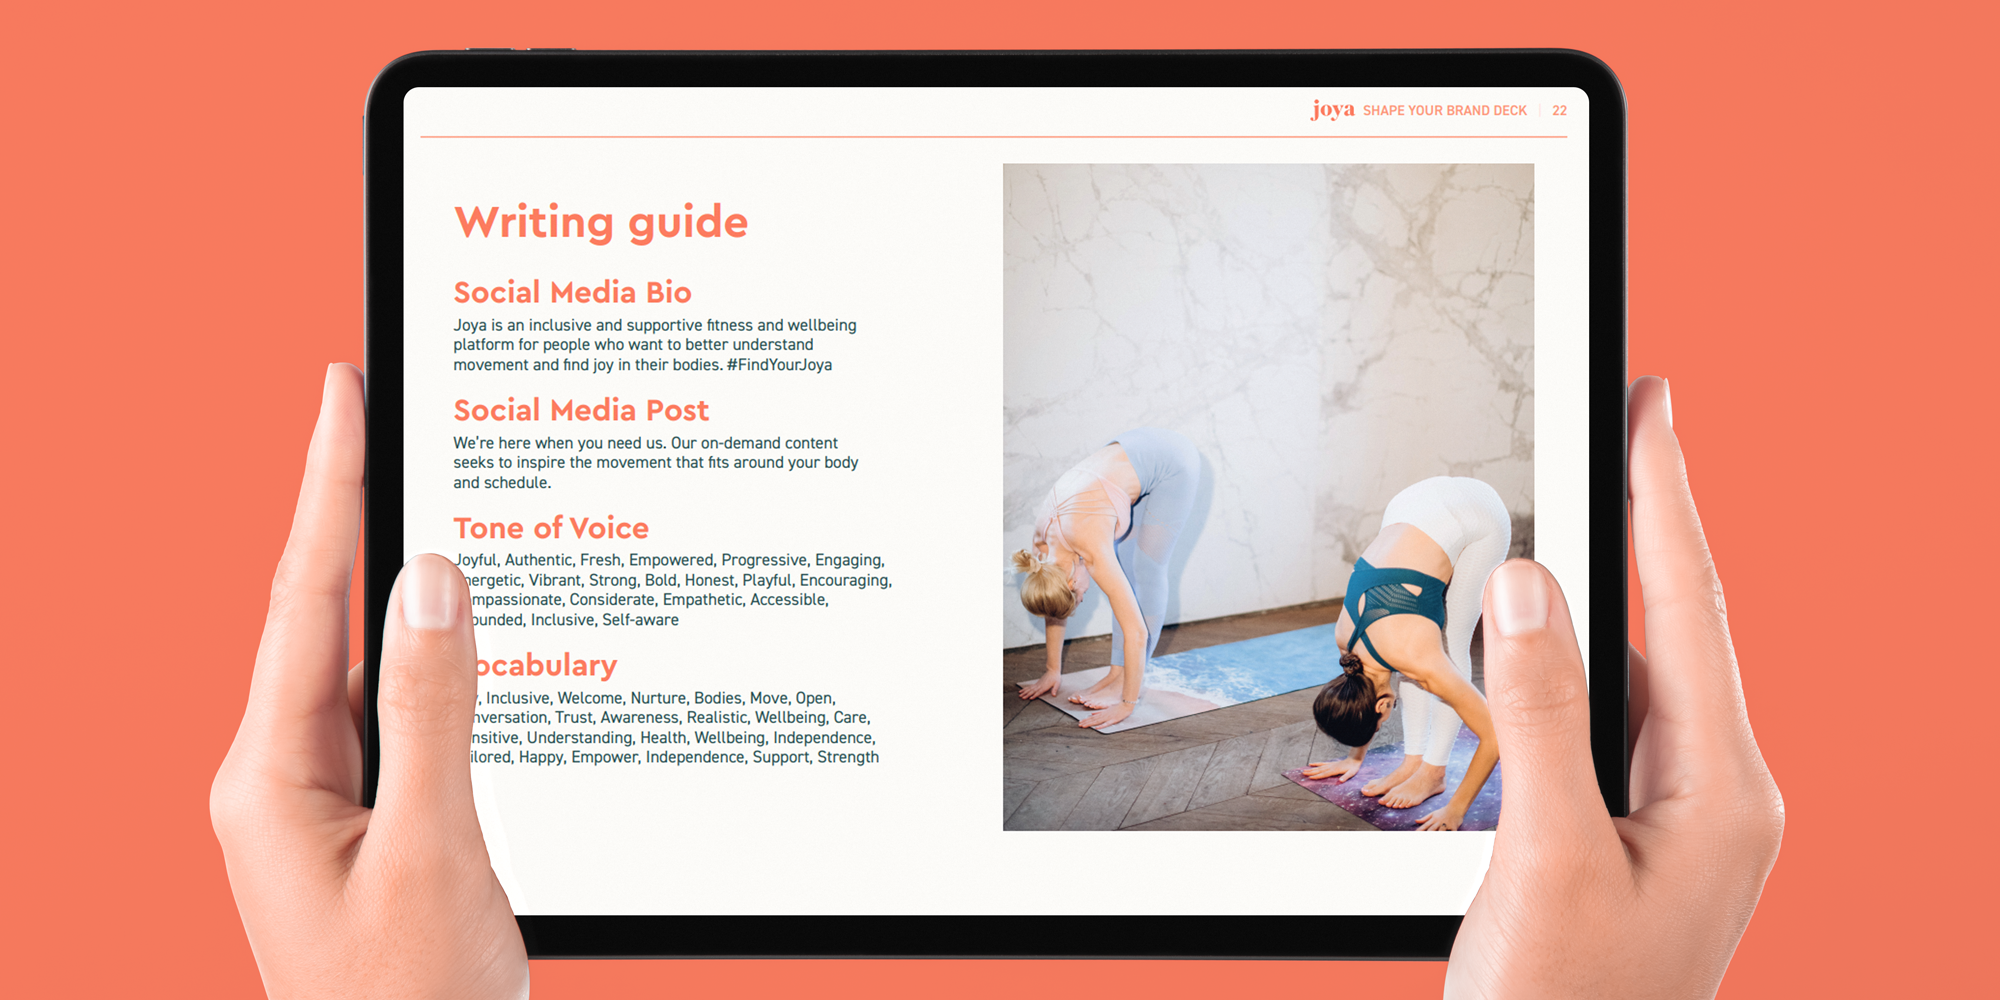 An Ipad showing the Writing Guide for Joya, with an image of two people doing yoga poses